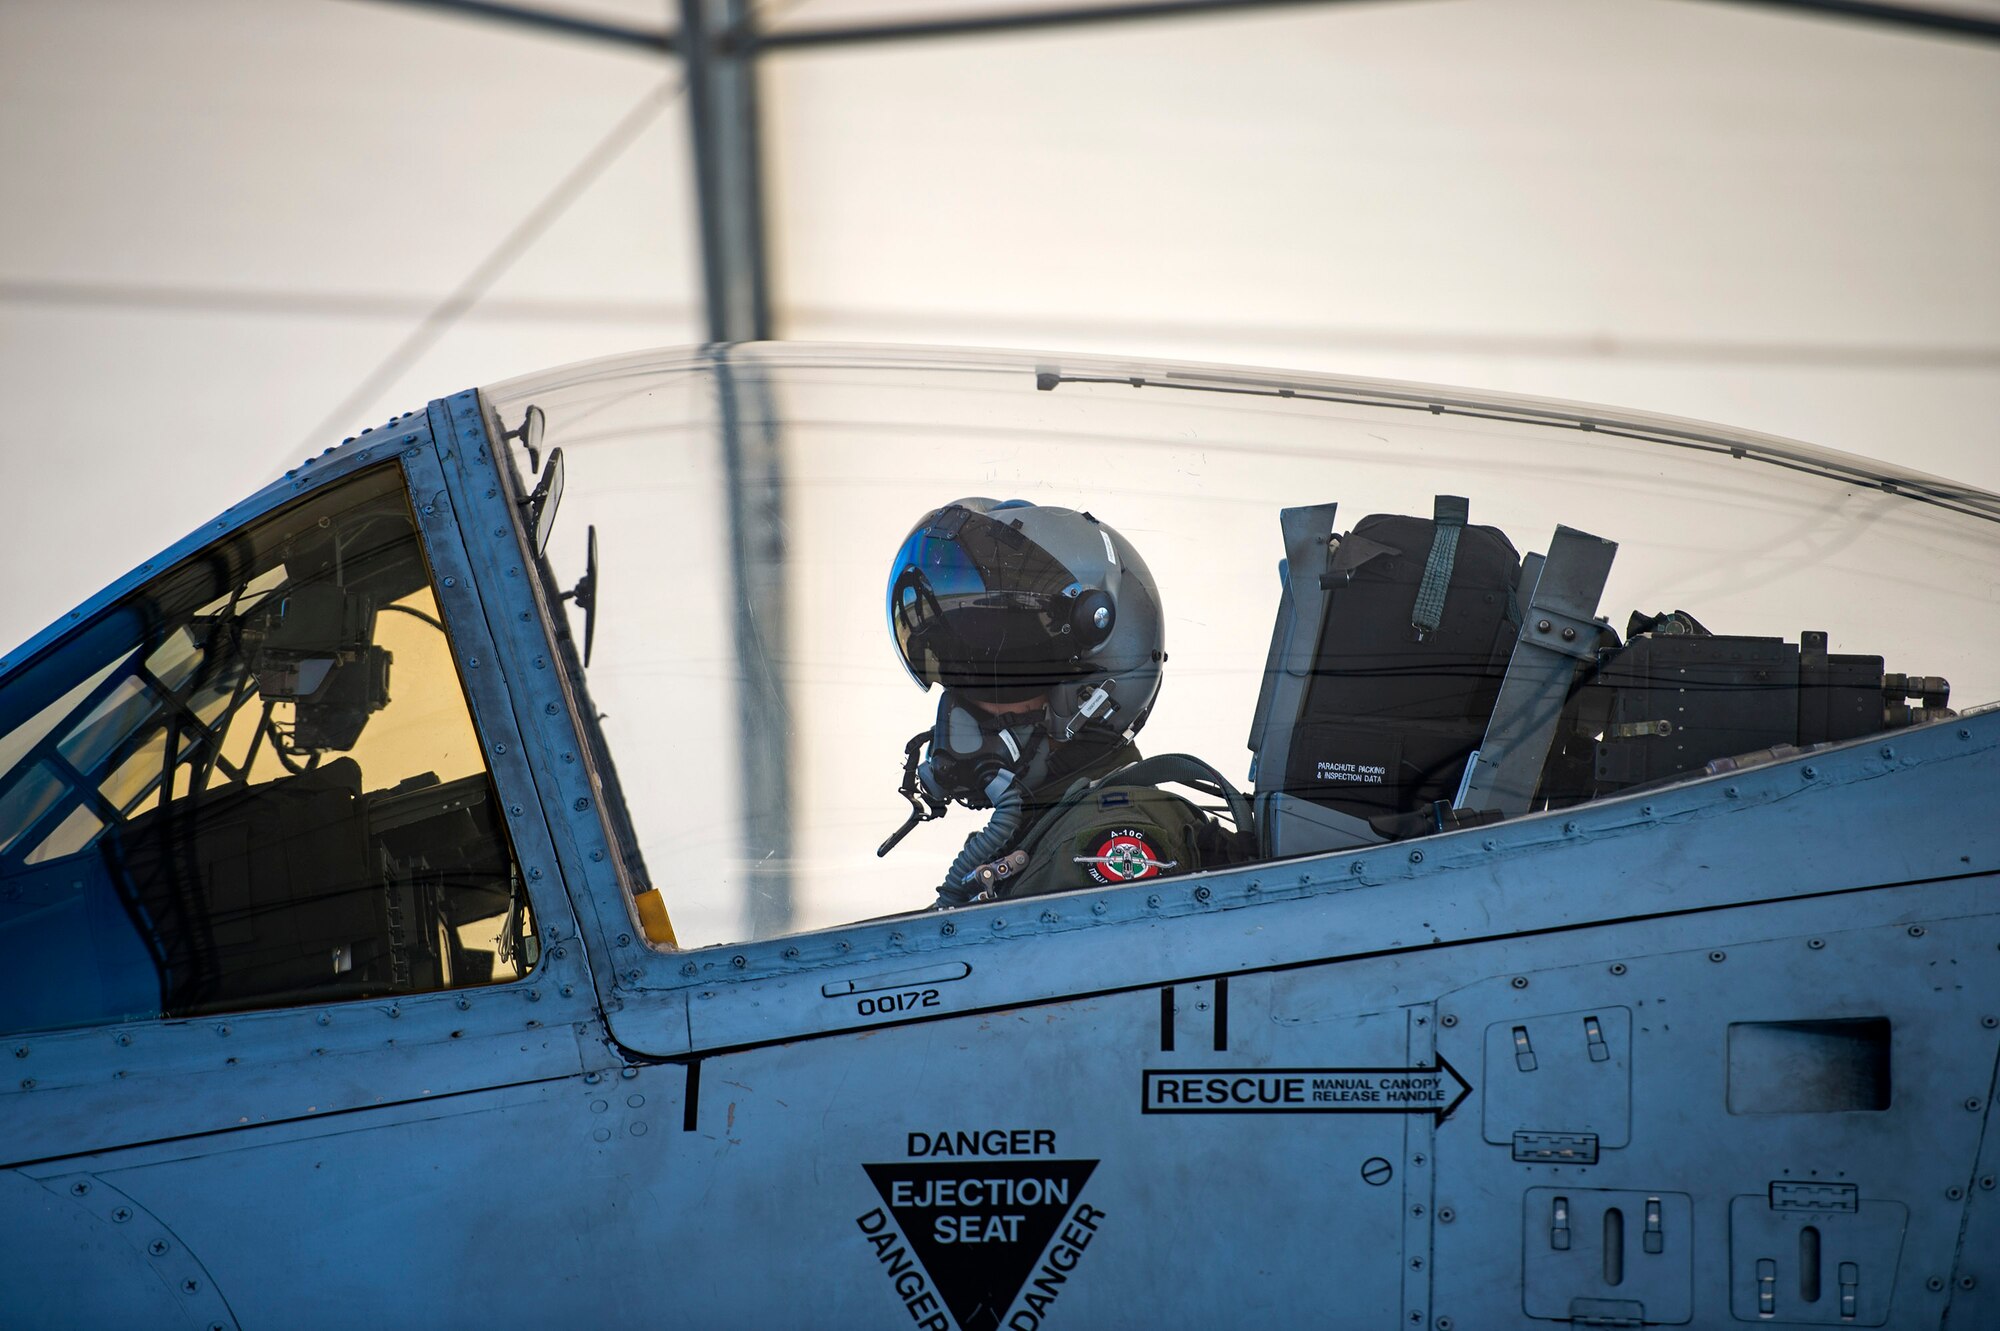 Italian exchange pilot Roberto Manzo, 74th Fighter Squadron training assistant, prepares to taxi to the runway, Aug. 25, 2016, at Moody Air Force Base, Ga. Manzo is working to master flying the A-10C Thunderbolt II in hopes of returning to Italy as an instructor pilot for the aircraft. (U.S. Air Force photo by Airman 1st Class Janiqua P. Robinson)